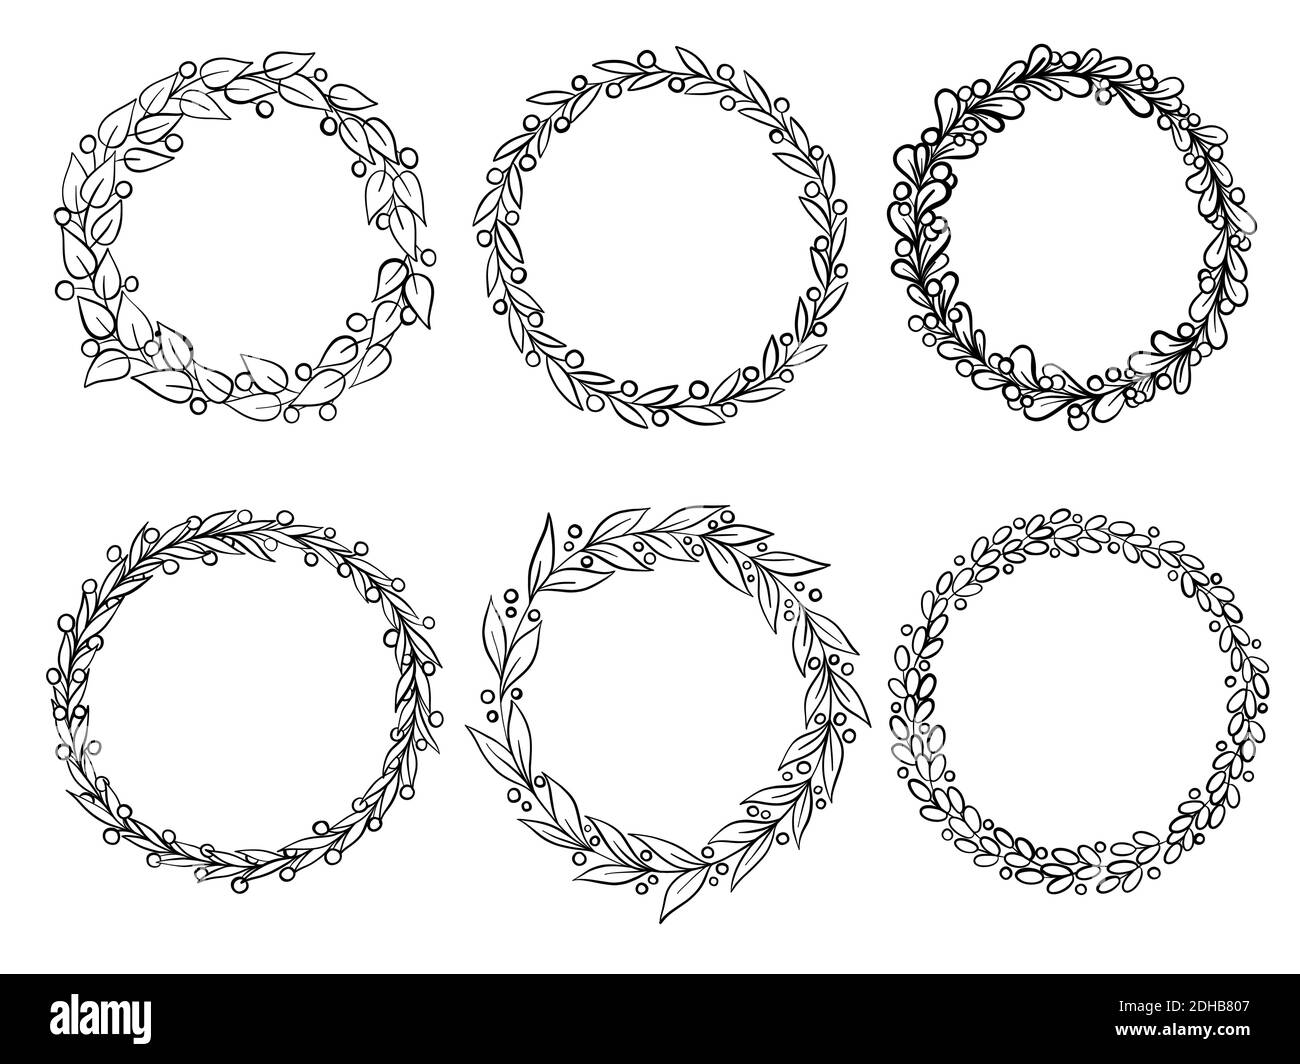 Hand drawn vector wreath collection. Floral circle frame set design element for invitations, greeting cards, posters, blogs. Delicate branches Stock Vector